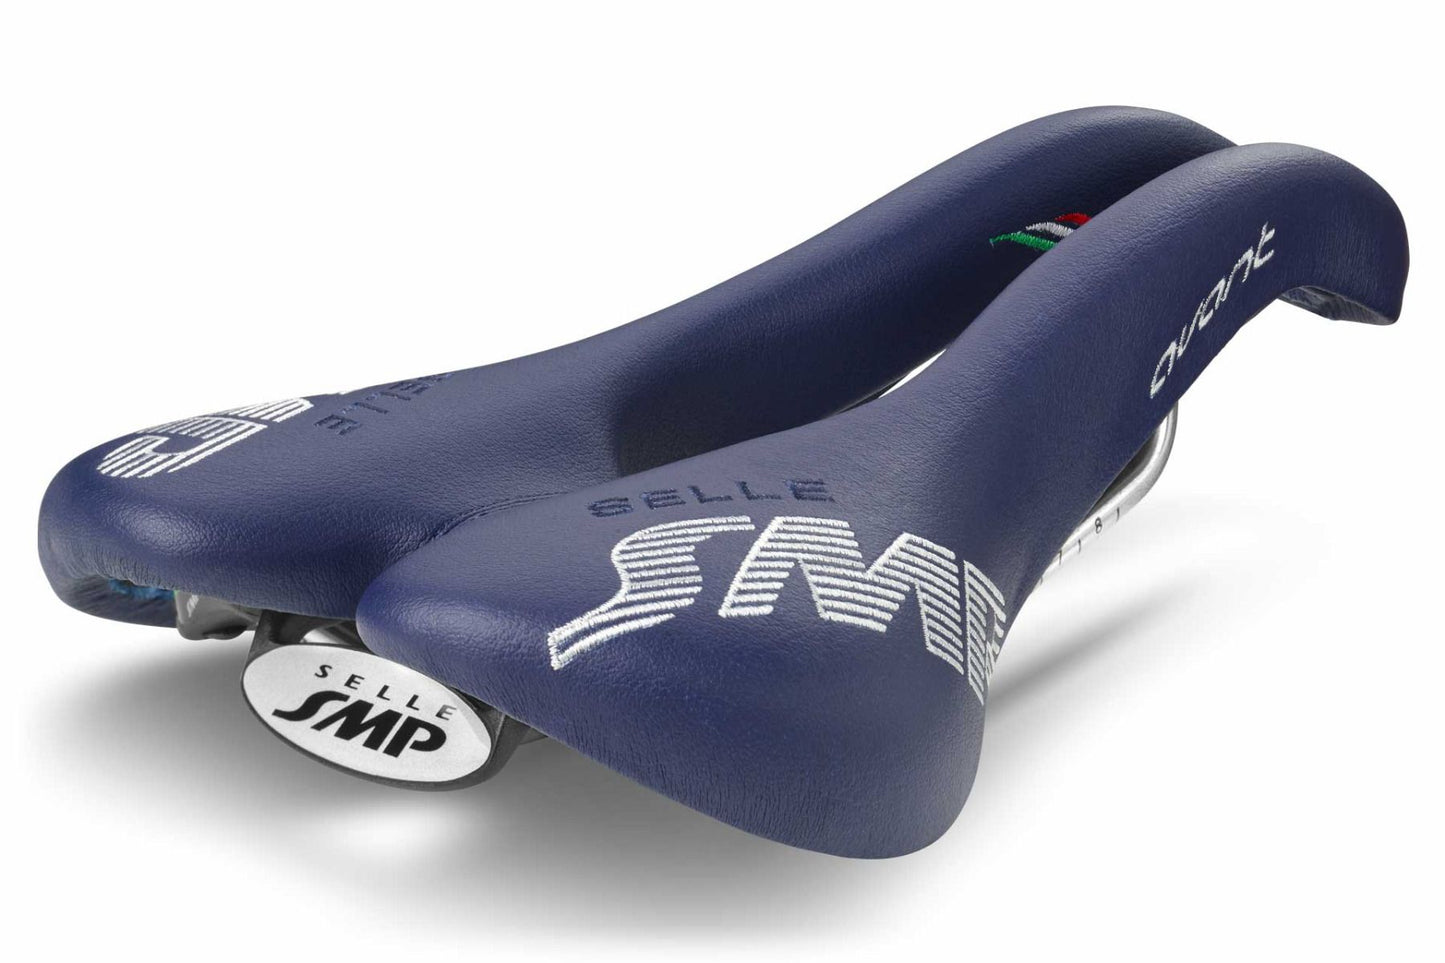 Selle SMP Avant Saddle with Stainless Steel Rails (Blue)